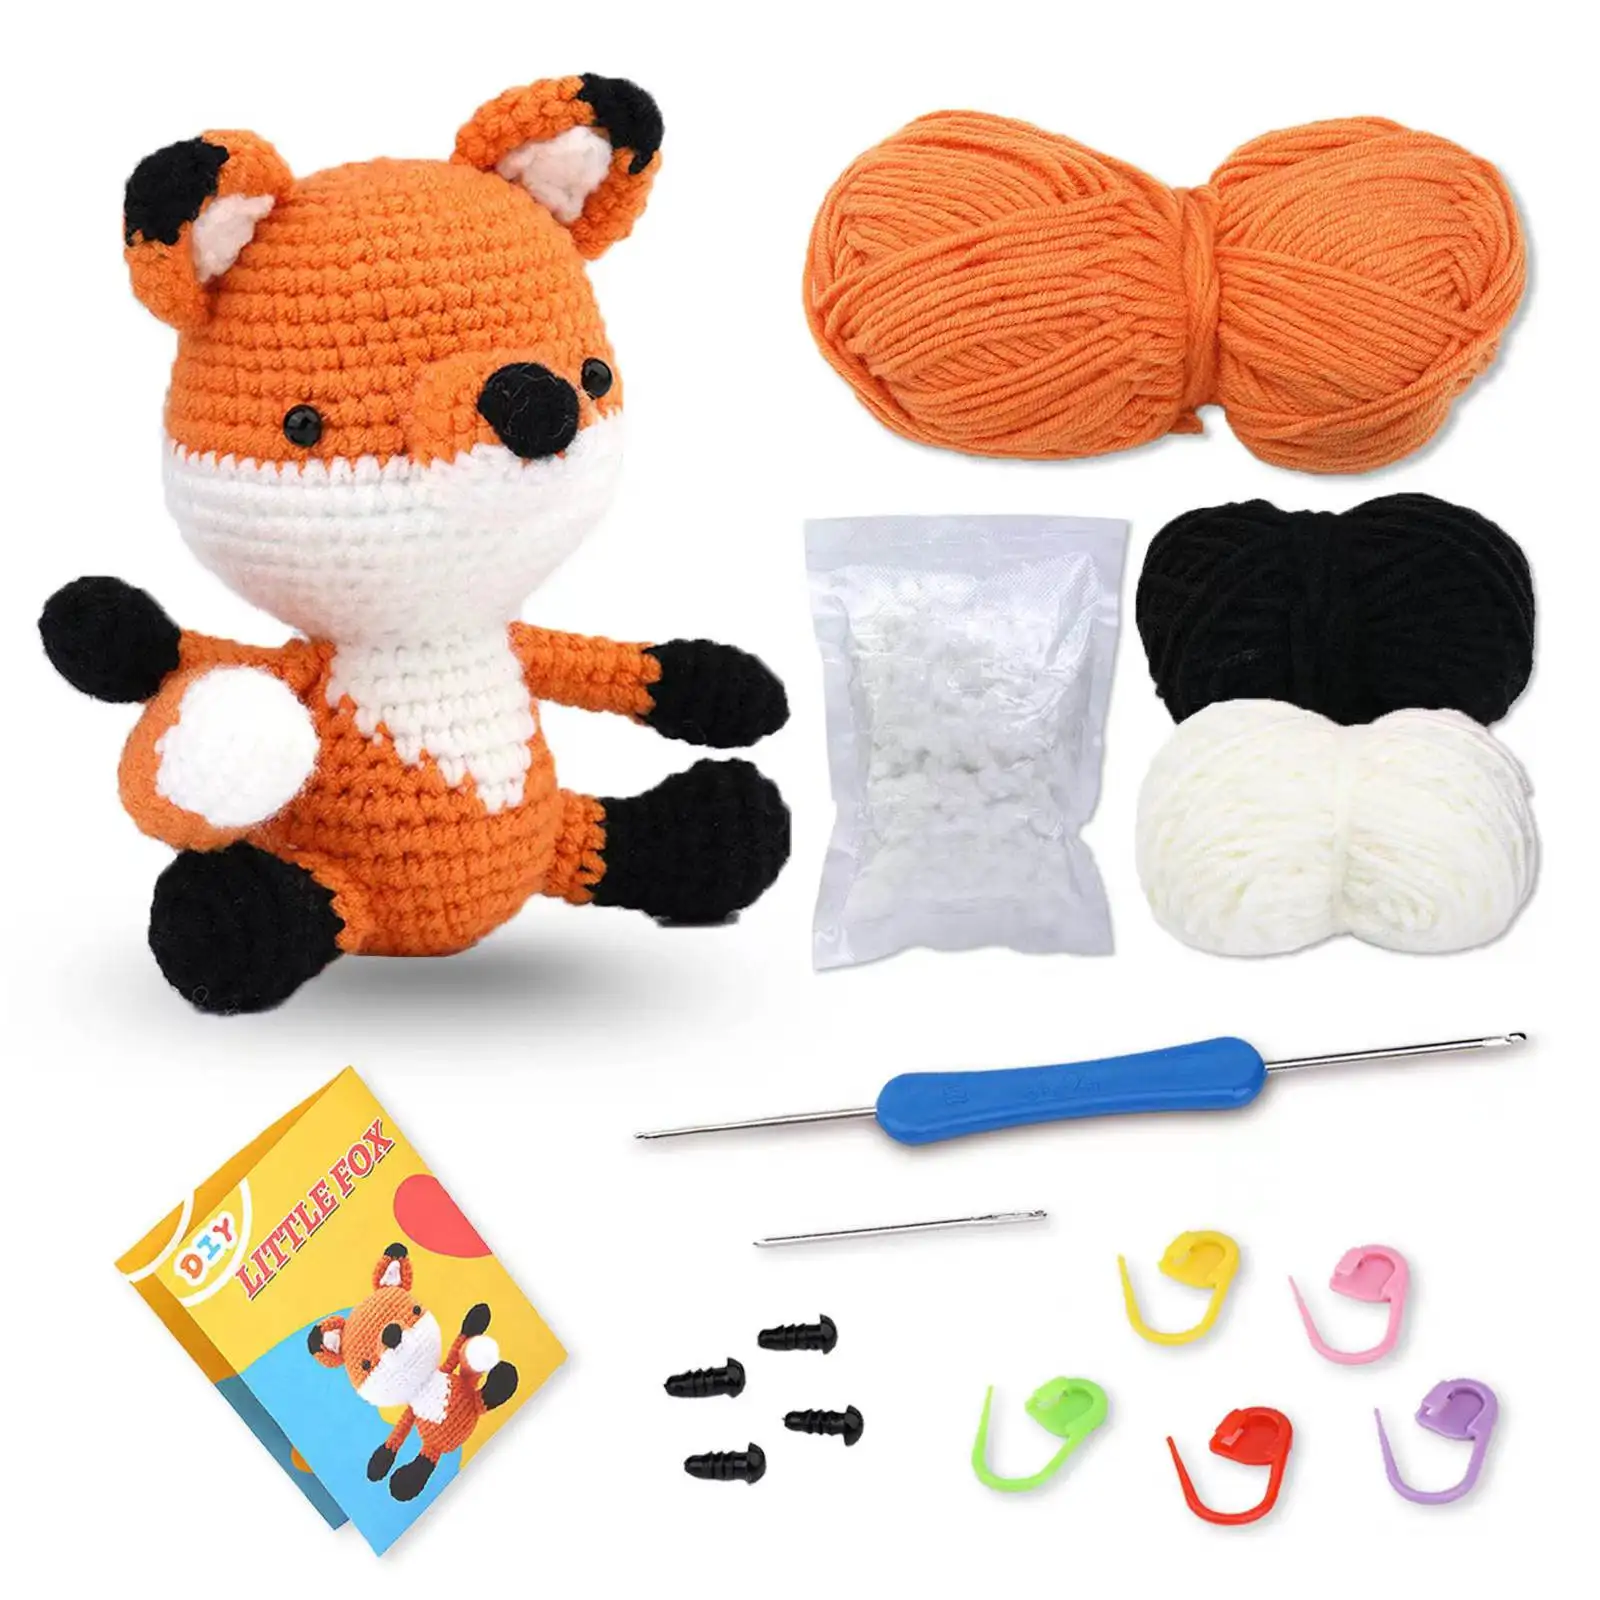 

Crochet Kits for Adults and Kids DIY Knitting Supplies Crochet Kit for Beginners with Step-by-Step Video Tutorials